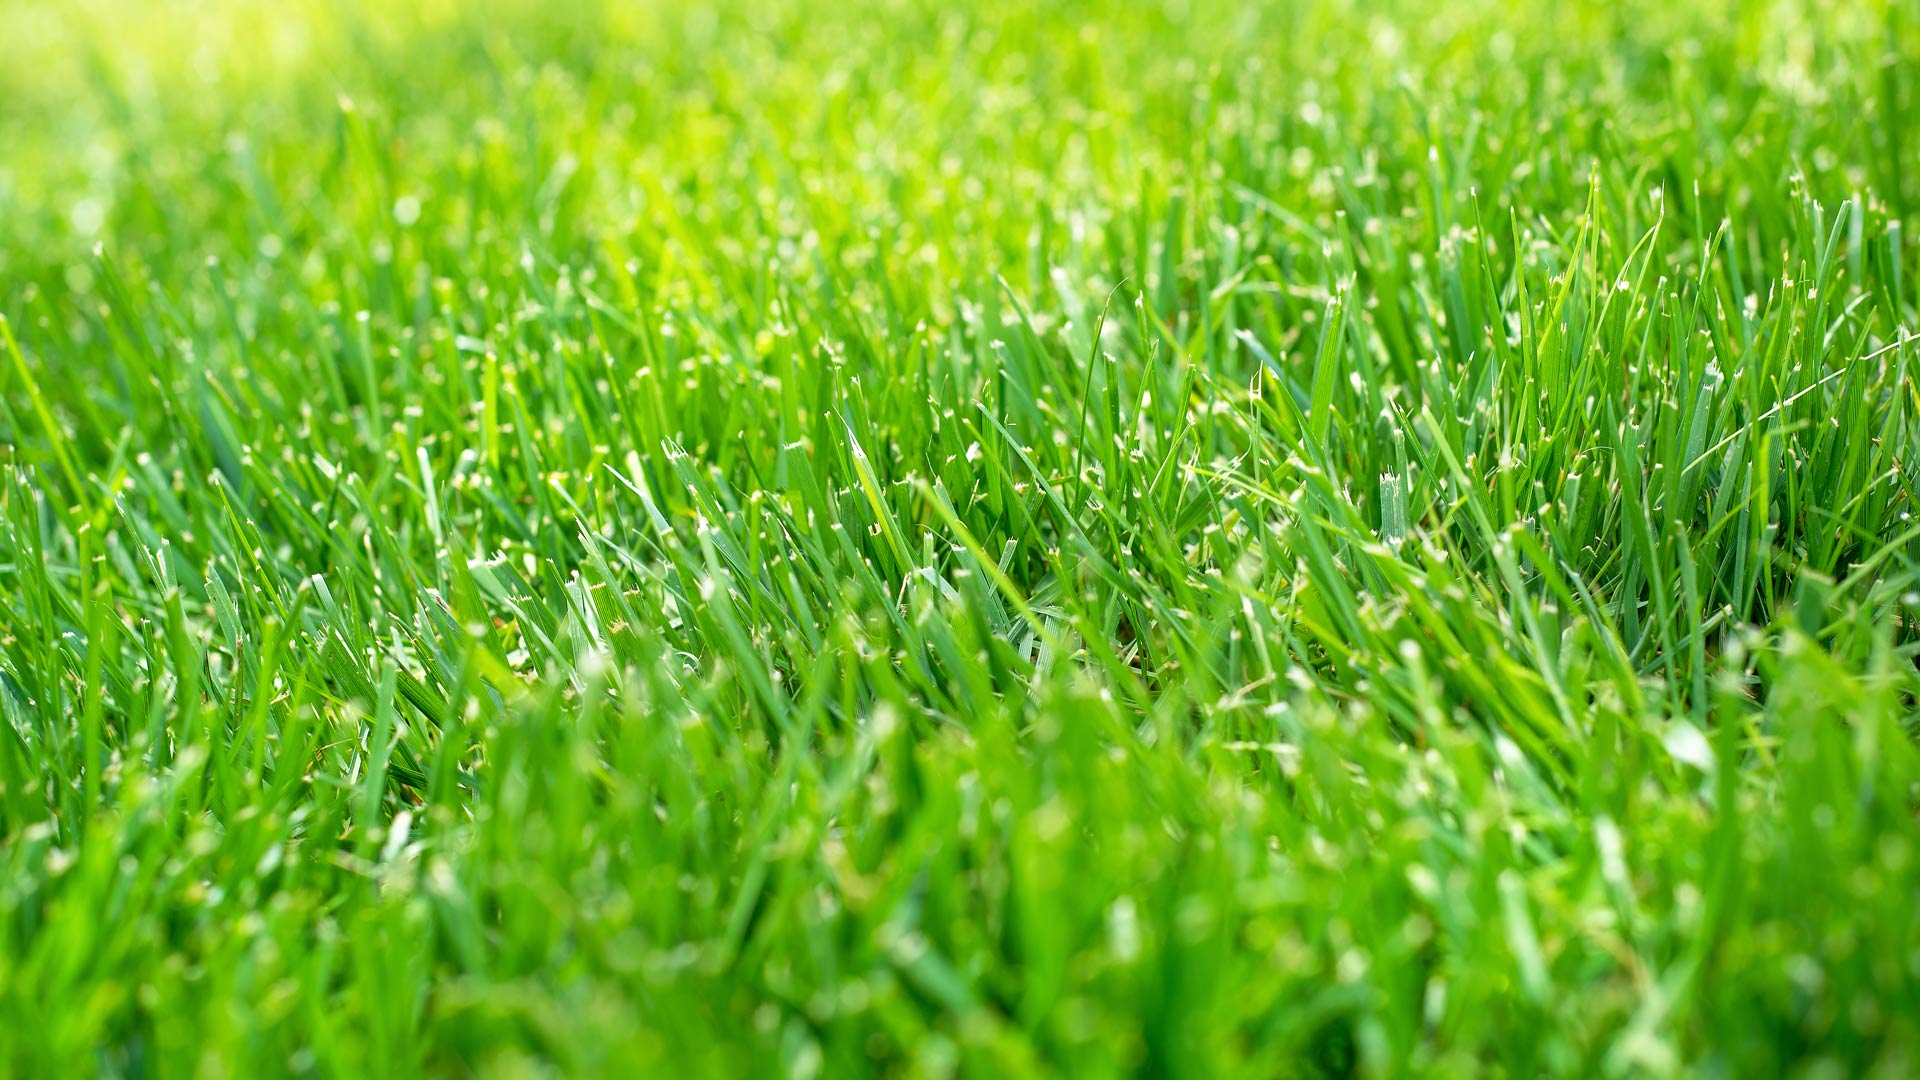 Grass blades in a lawn after mowing serviced in Marysville, IN.